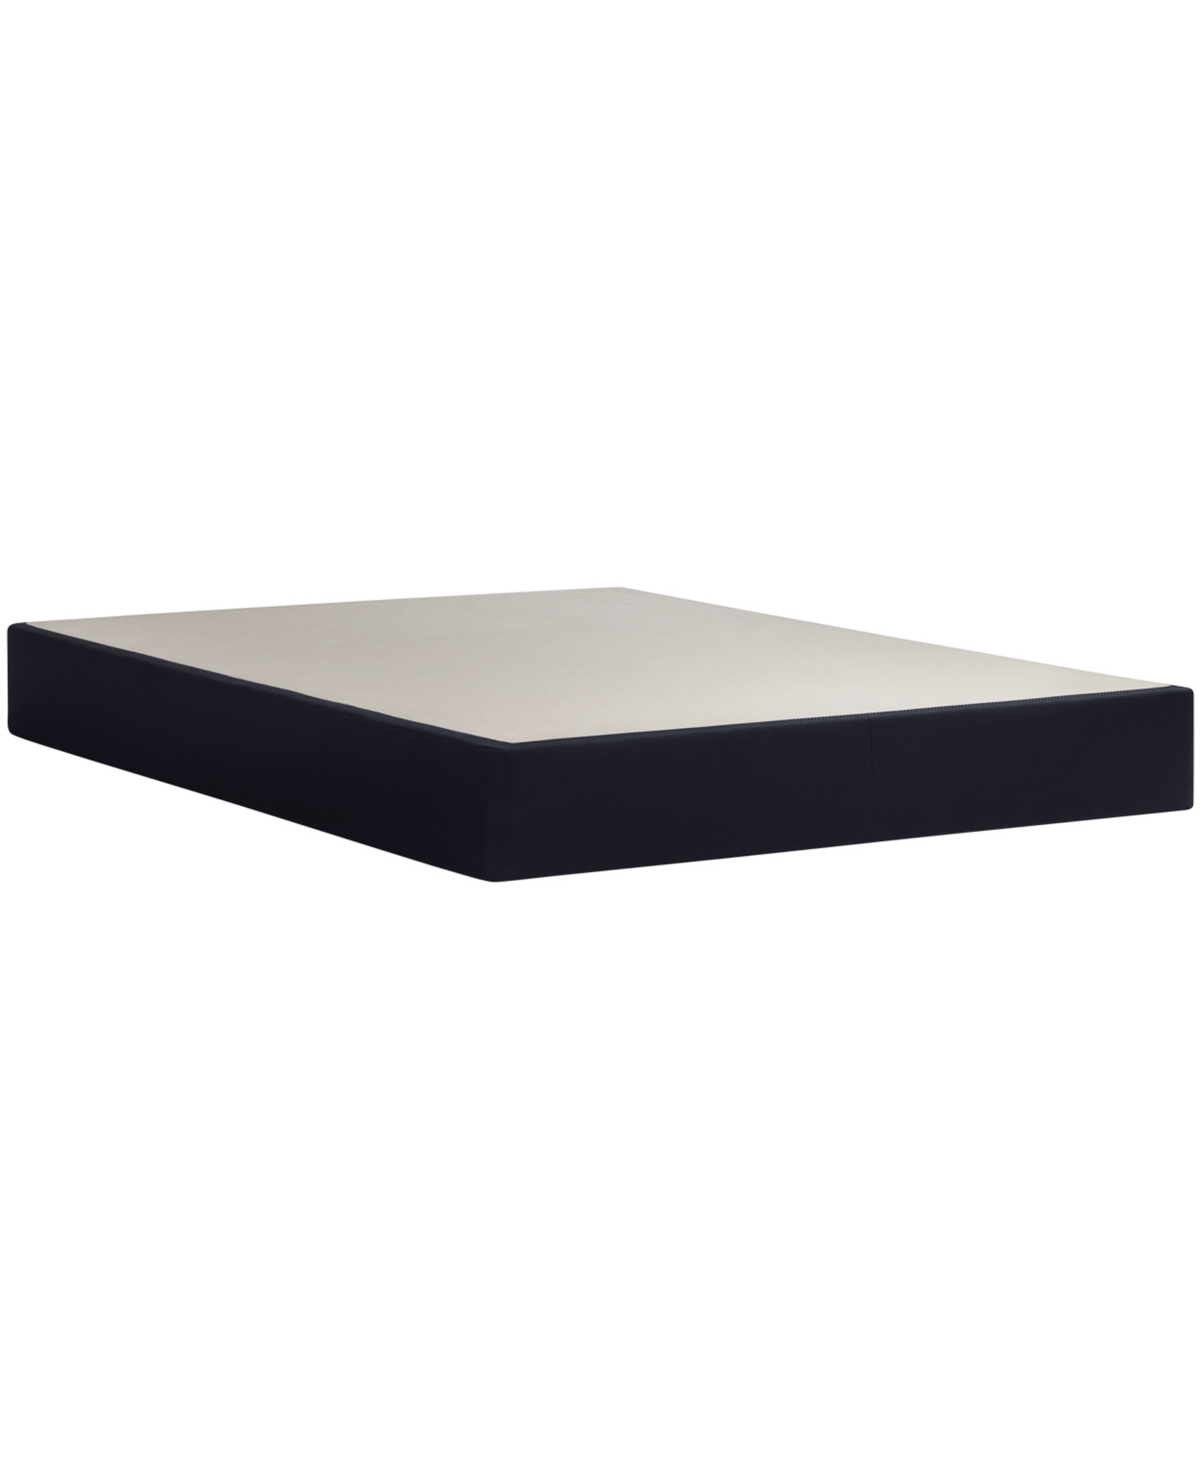 Stearns & Foster Standard Profile Box Spring - King